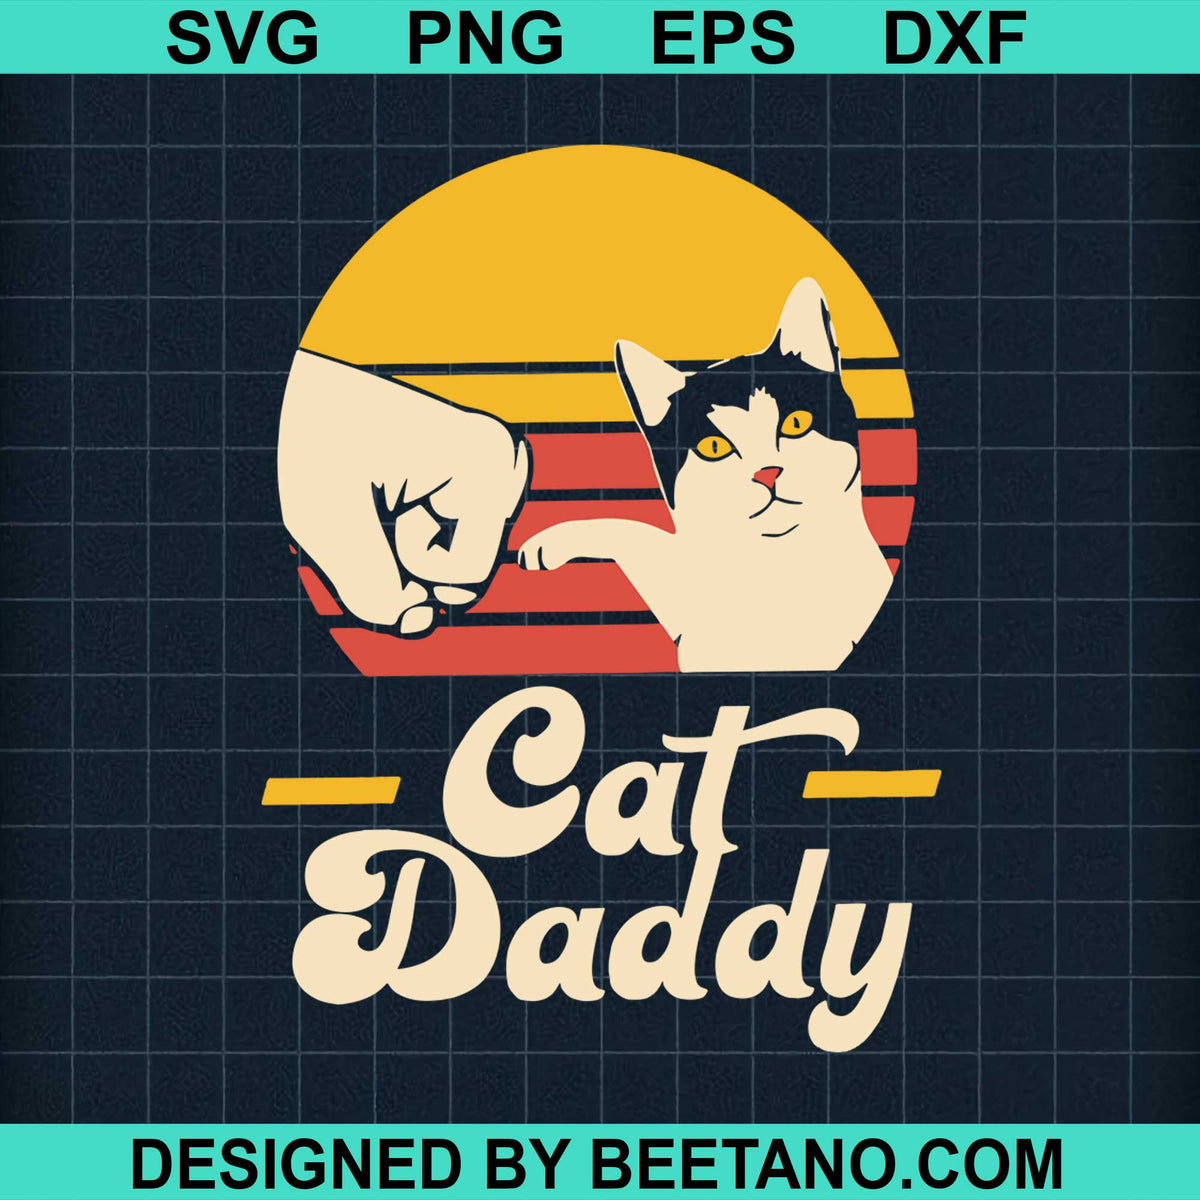 Download Cat Daddy 2020 Svg Cut File For Cricut Silhouette Machine Make Craft H Beetanosvg Scalable Vector Graphics PSD Mockup Templates